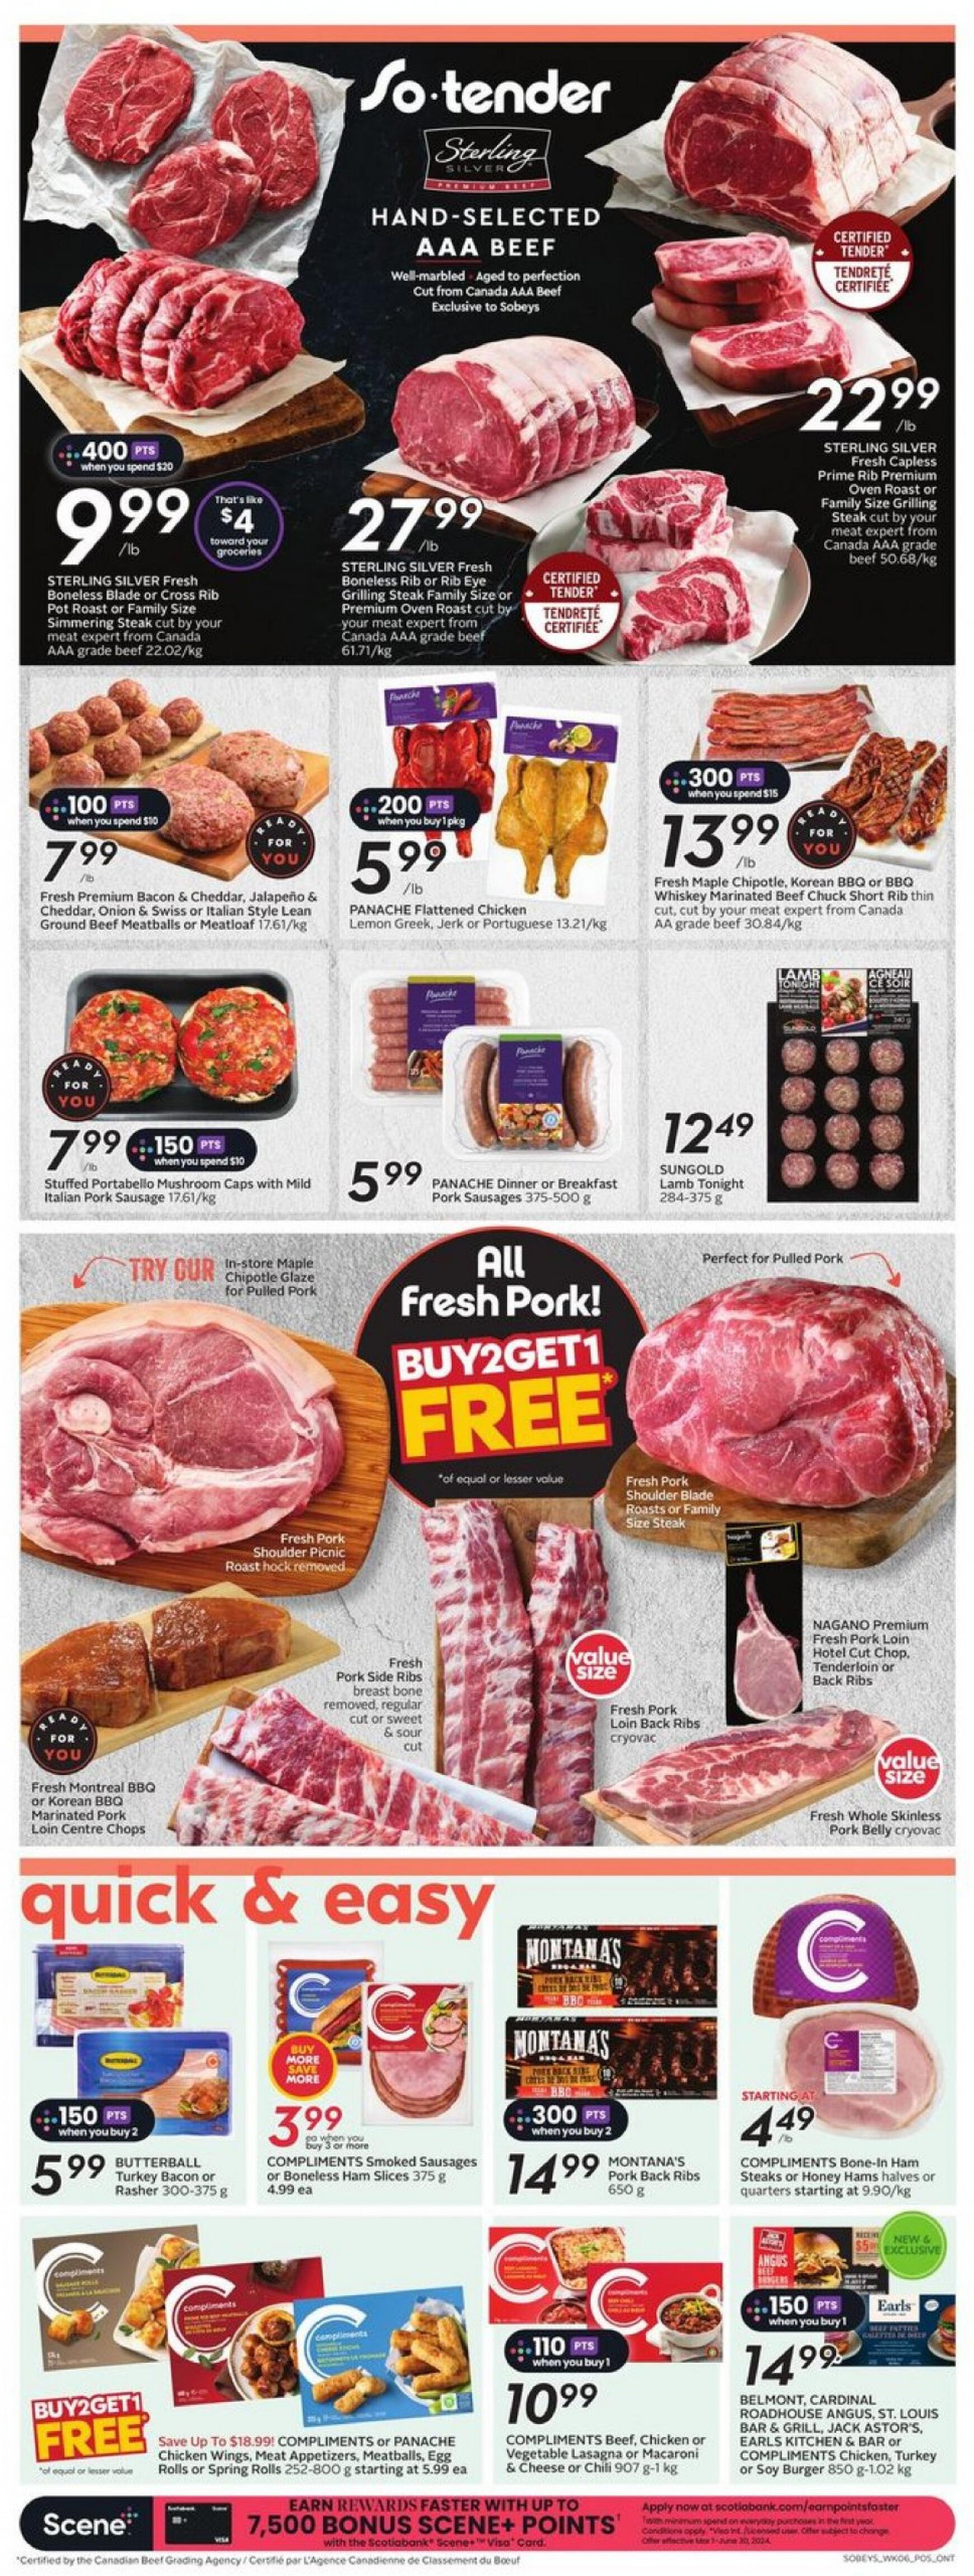 sobeys - Sobeys - Weekly Flyer - Ontario flyer current 06.06. - 12.06. - page: 9